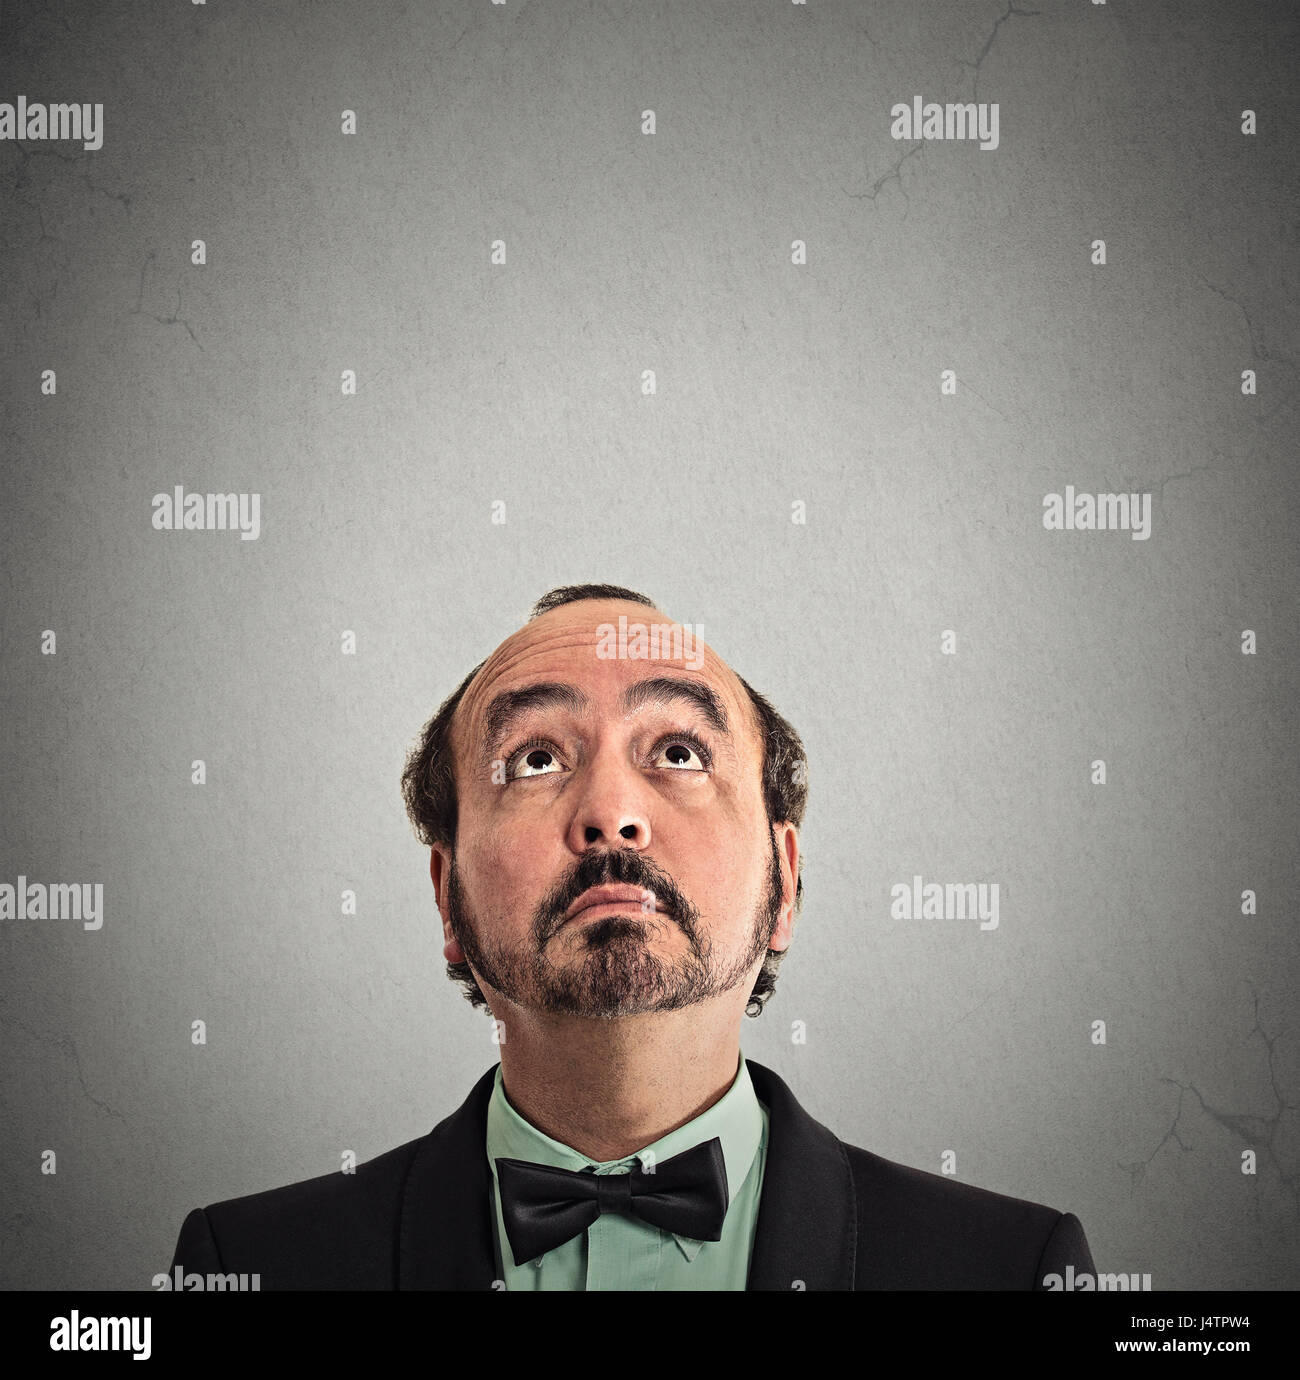 closeup portrait headshot middle aged man looking up isolated on grey wall background with copy space above head. Human face expressions, emotions, fe Stock Photo